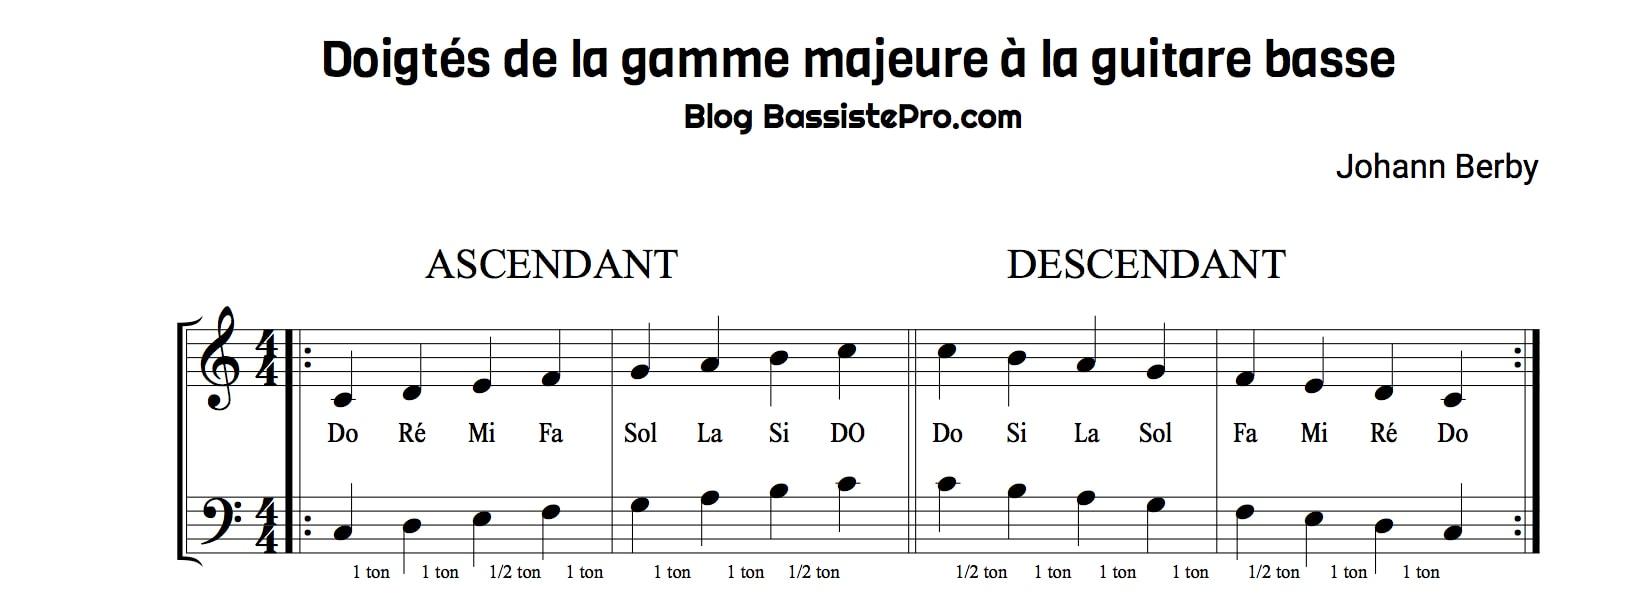 Doigtes gamme majeure guitare basse intervalles